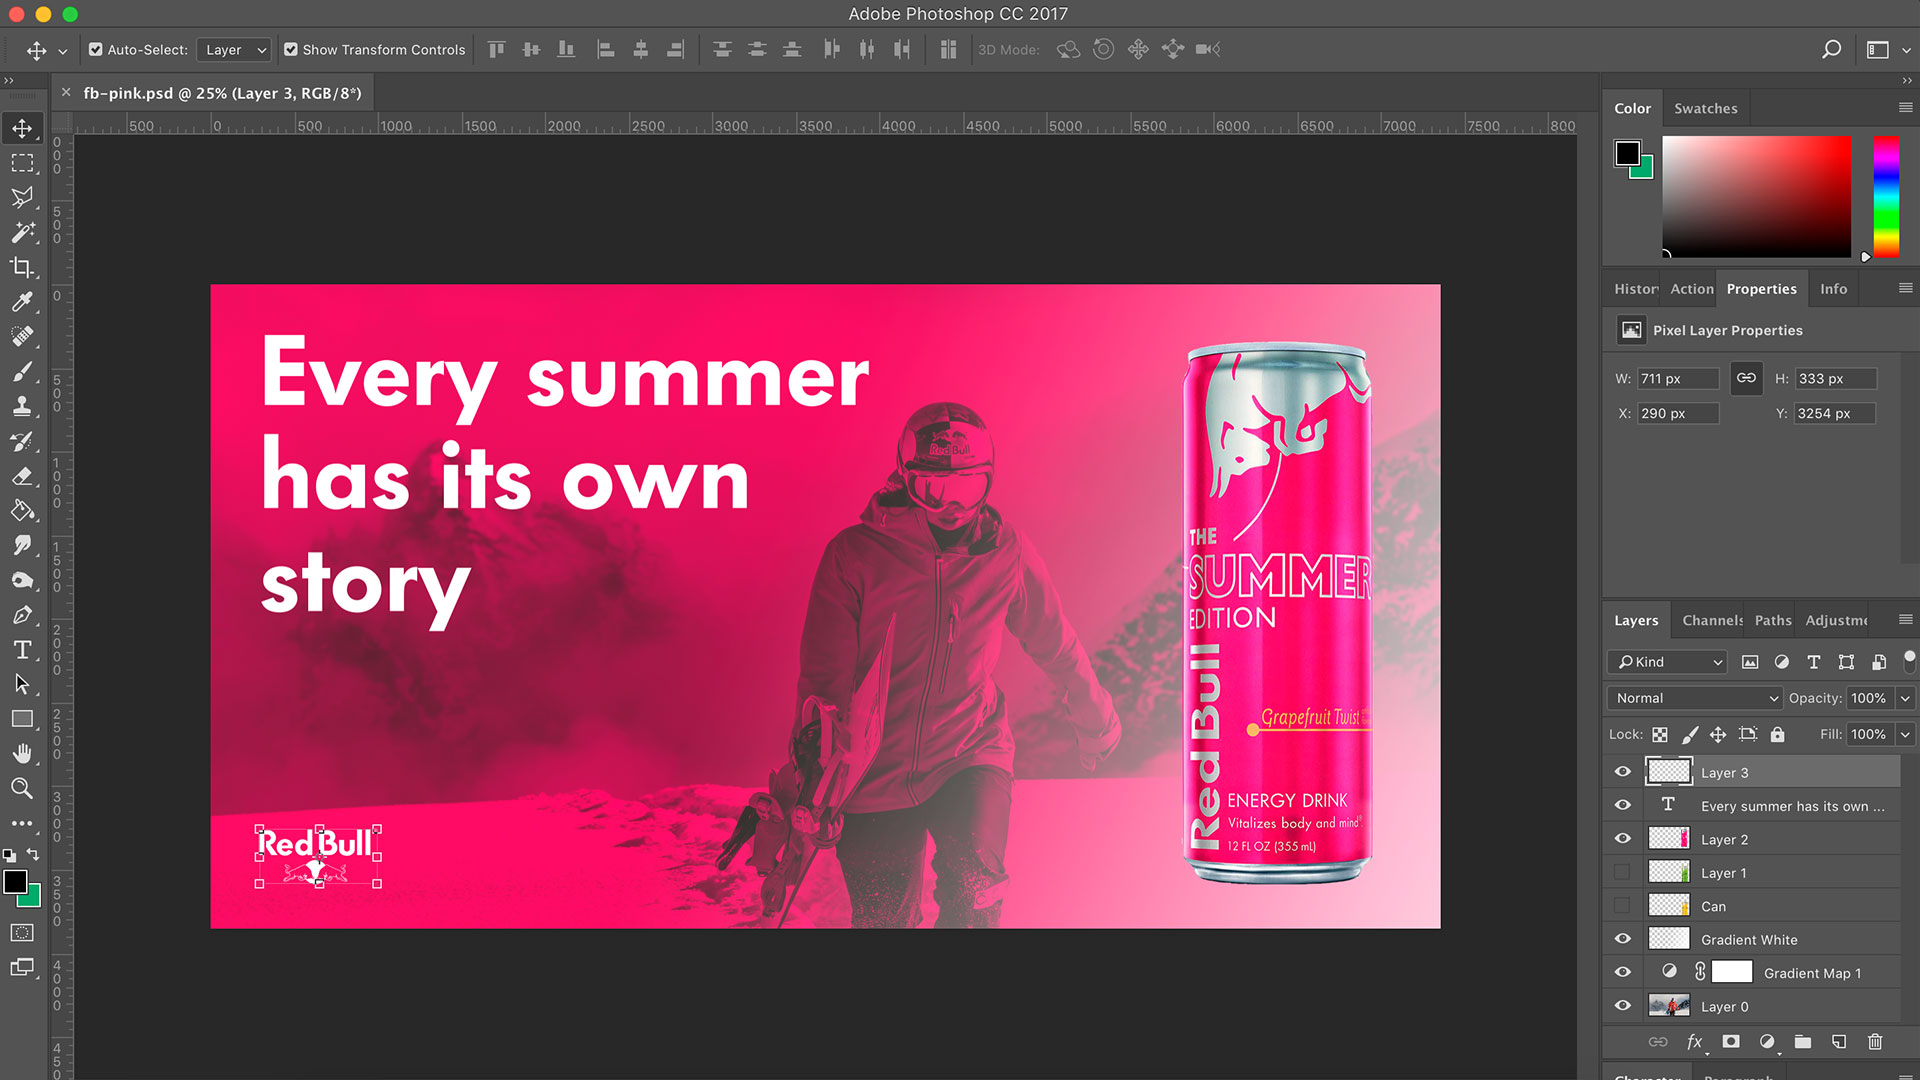 Screenshot of the design of the adverts taking place in Adobe Photoshop.